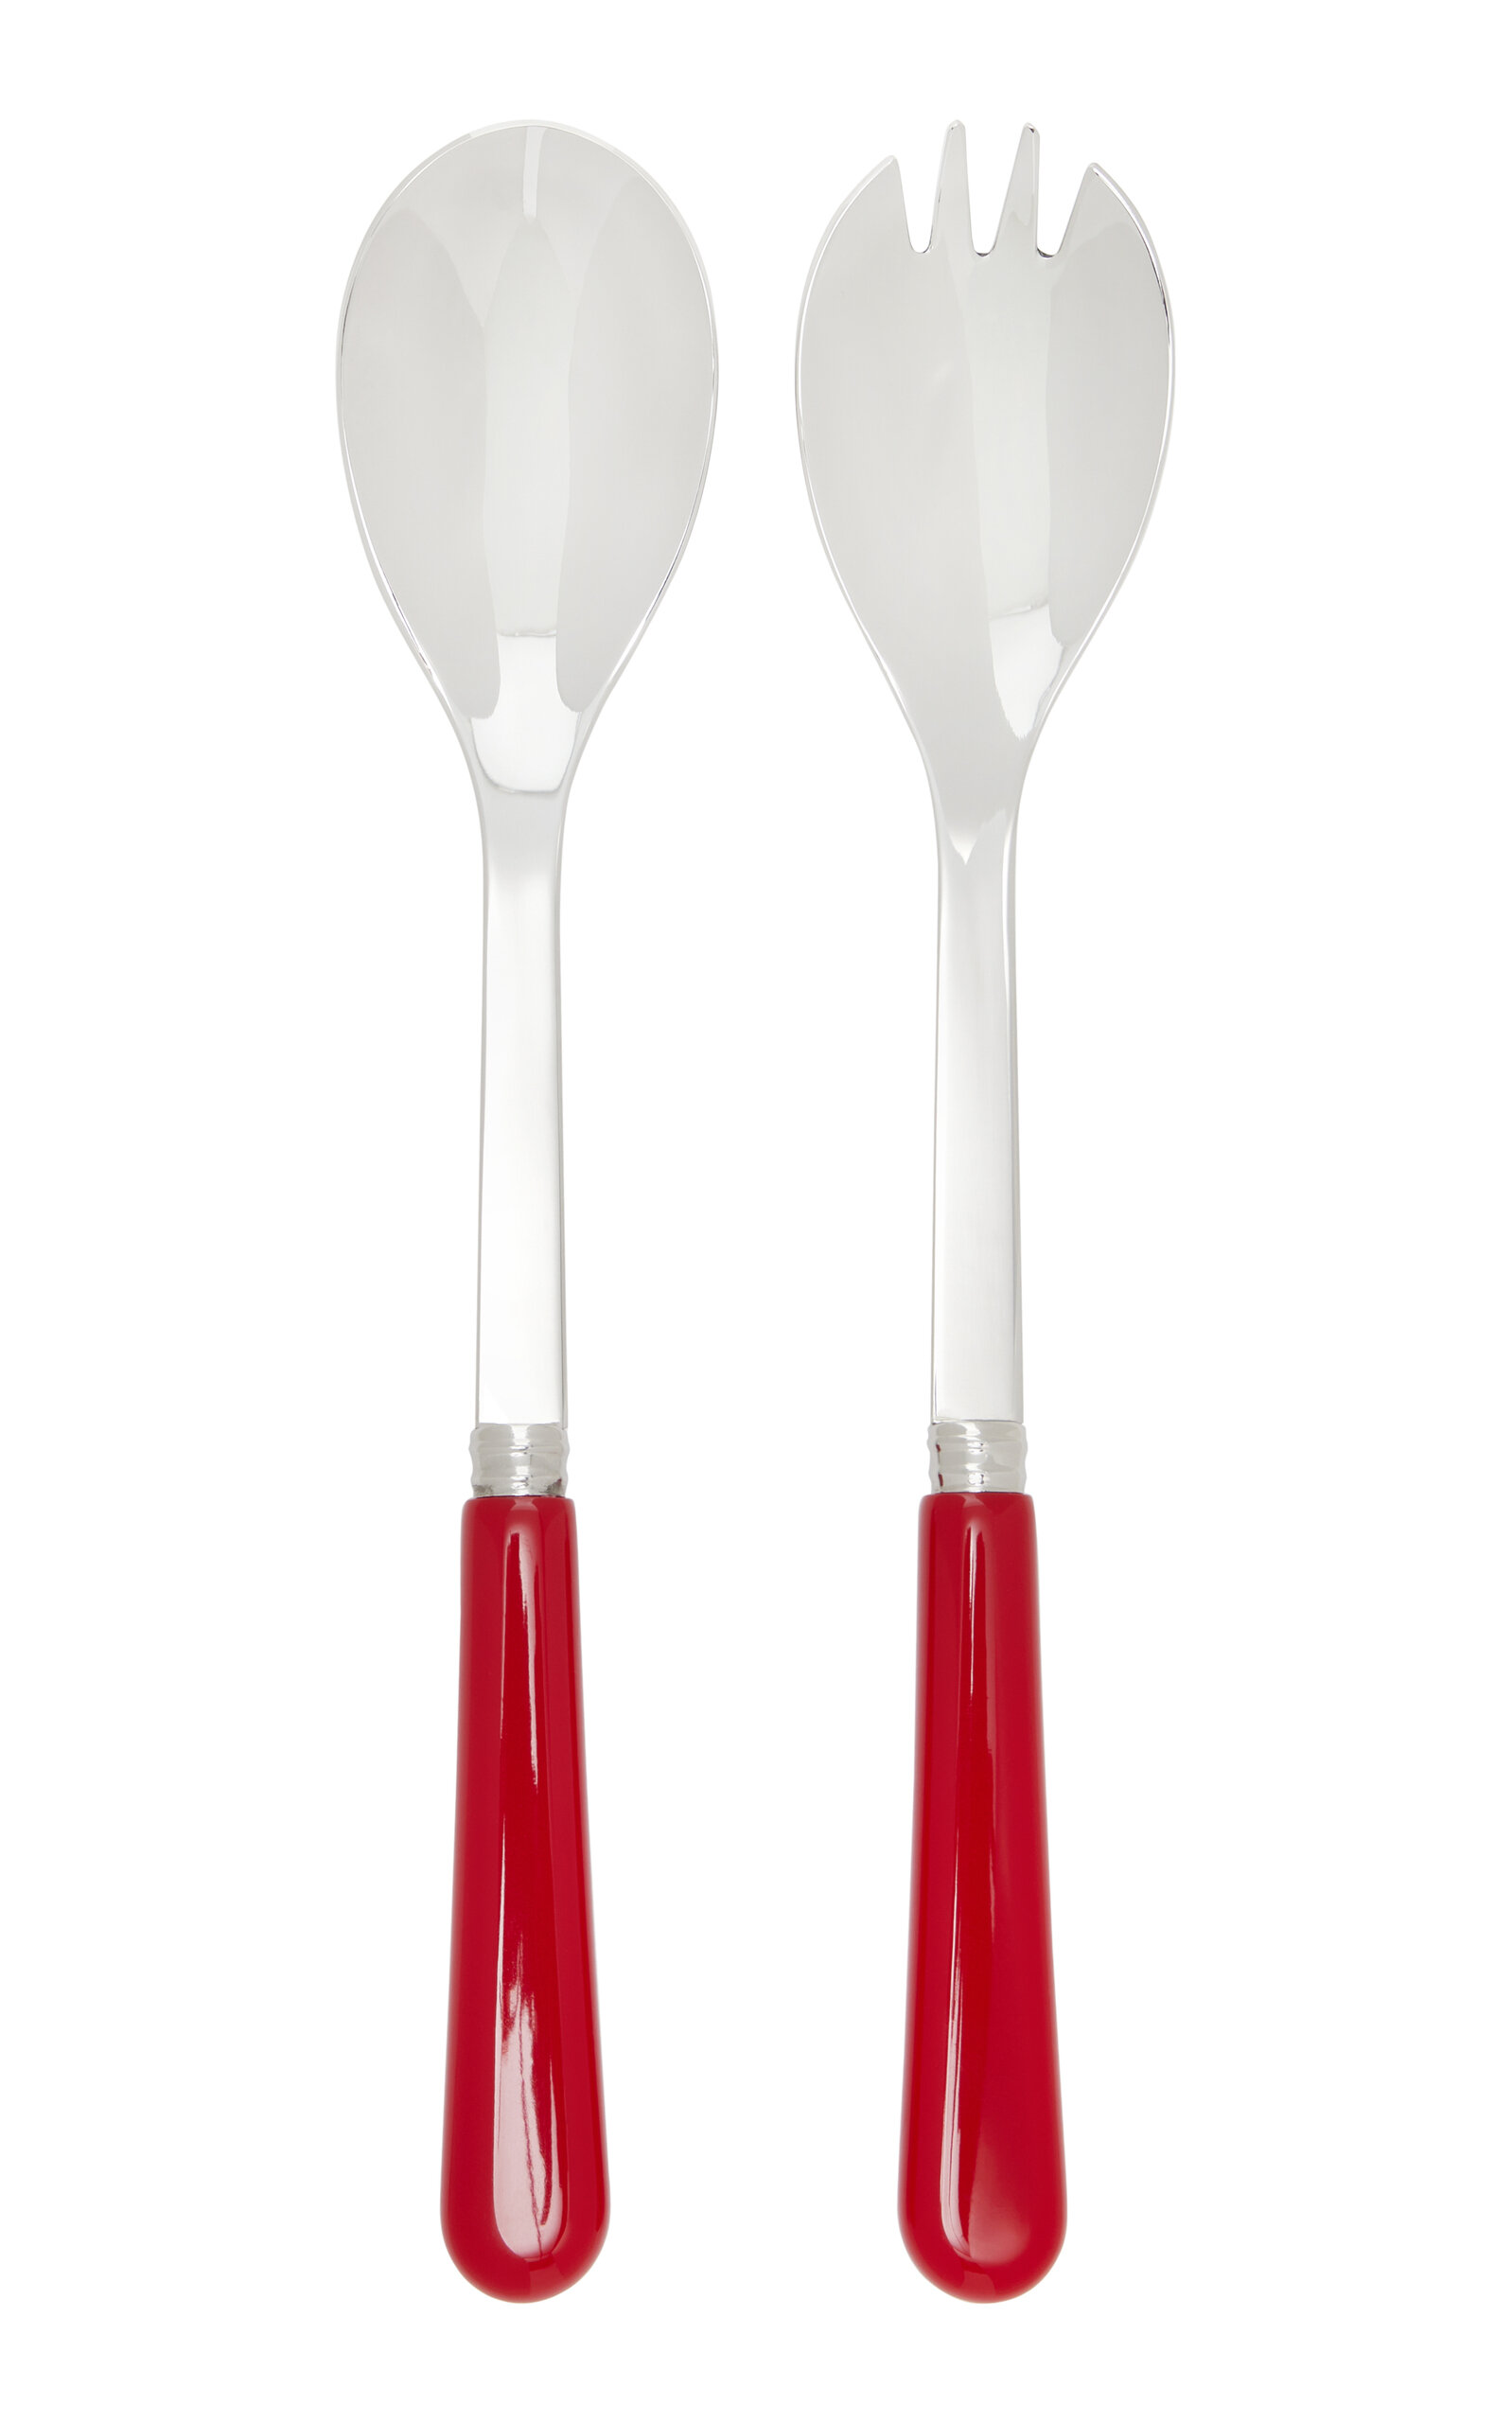 Sabre Two-piece Pop Stainless Steel Salad Set In Red